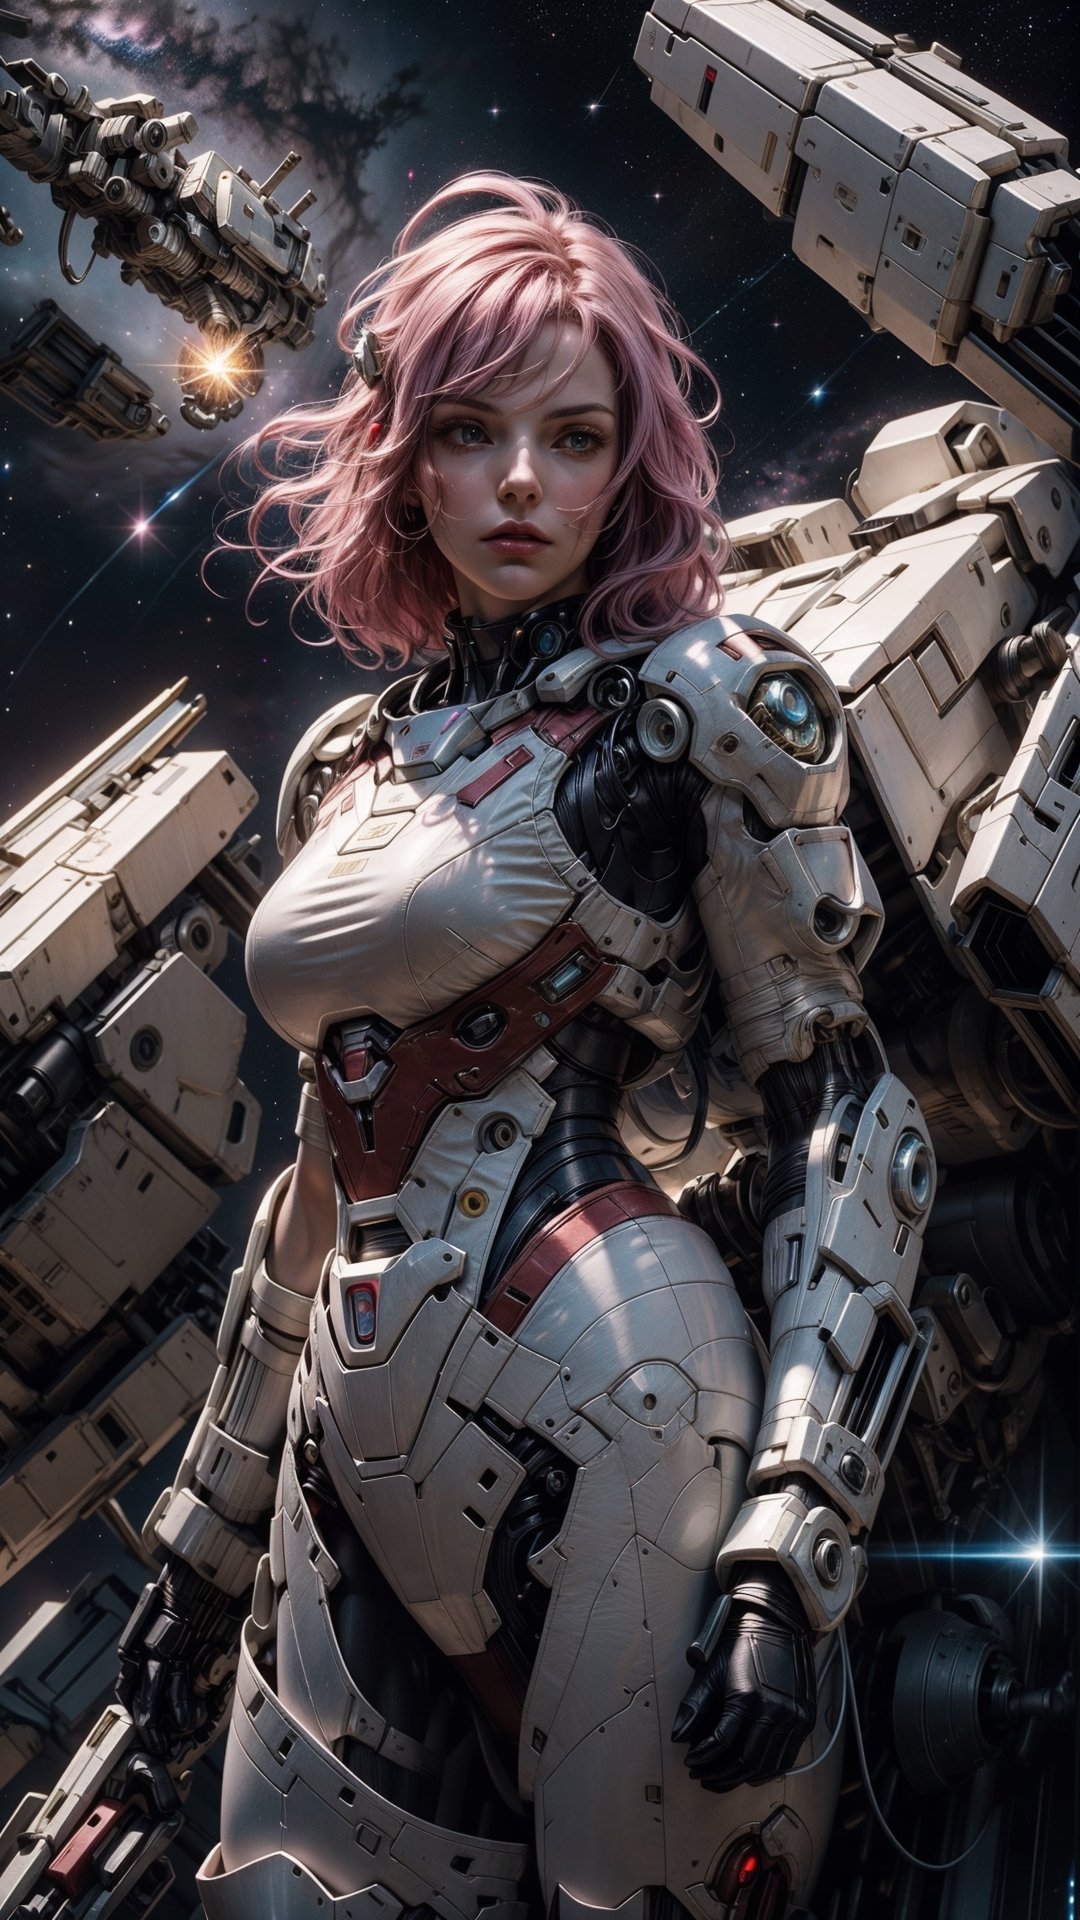 (4k), (masterpiece), (best quality),(extremely intricate), (realistic), (sharp focus), (award winning), (cinematic lighting), (extremely detailed), 

A young woman with long, flowing pink hair stands tall in the cockpit of her towering white mech suit, her face illuminated by the glow of the stars. The mech suit is a marvel of engineering, with sleek lines and powerful weaponry. The woman herself is a skilled warrior, trained in the arts of combat and piloting.

She is standing in front of a vast nebula, its swirling colors creating a breathtaking backdrop. The nebula is home to a variety of alien lifeforms, some of which are hostile to humanity. But the woman is not afraid. She is here to protect her people and to explore the unknown.

She raises her fist in a gesture of defiance, and her mech suit roars to life. She is ready to face whatever challenges the nebula may throw her way.

Details:

The woman is a space mecha pilot / space warrior.
She has long, flowing pink hair.
She is wearing a white bodytight spacesuit.
She is standing in the cockpit of her towering white mech suit.
She is standing in front of a vast nebula.
She raises her fist in a gesture of defiance.

,mecha,princessmononoke